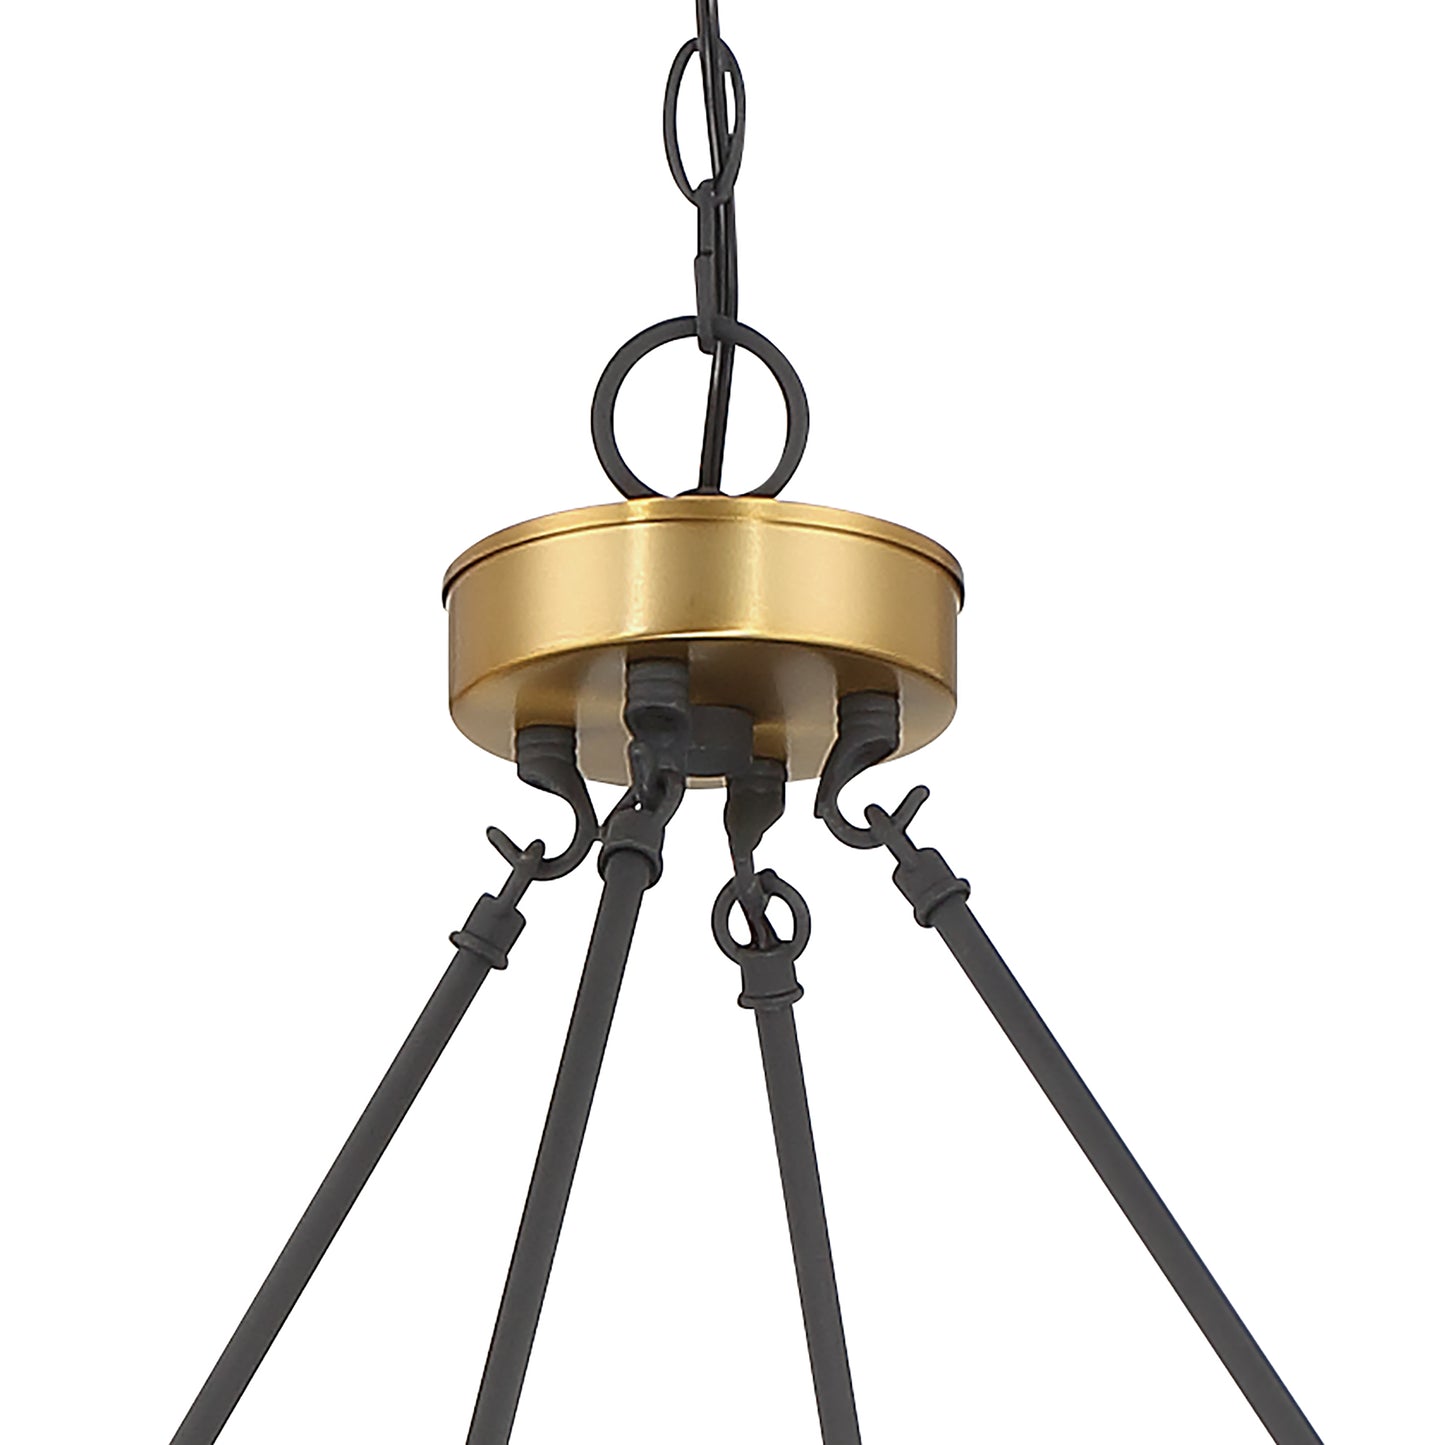 16-Light Classic Candle Style Wagon Wheel Chandelier UL Listed